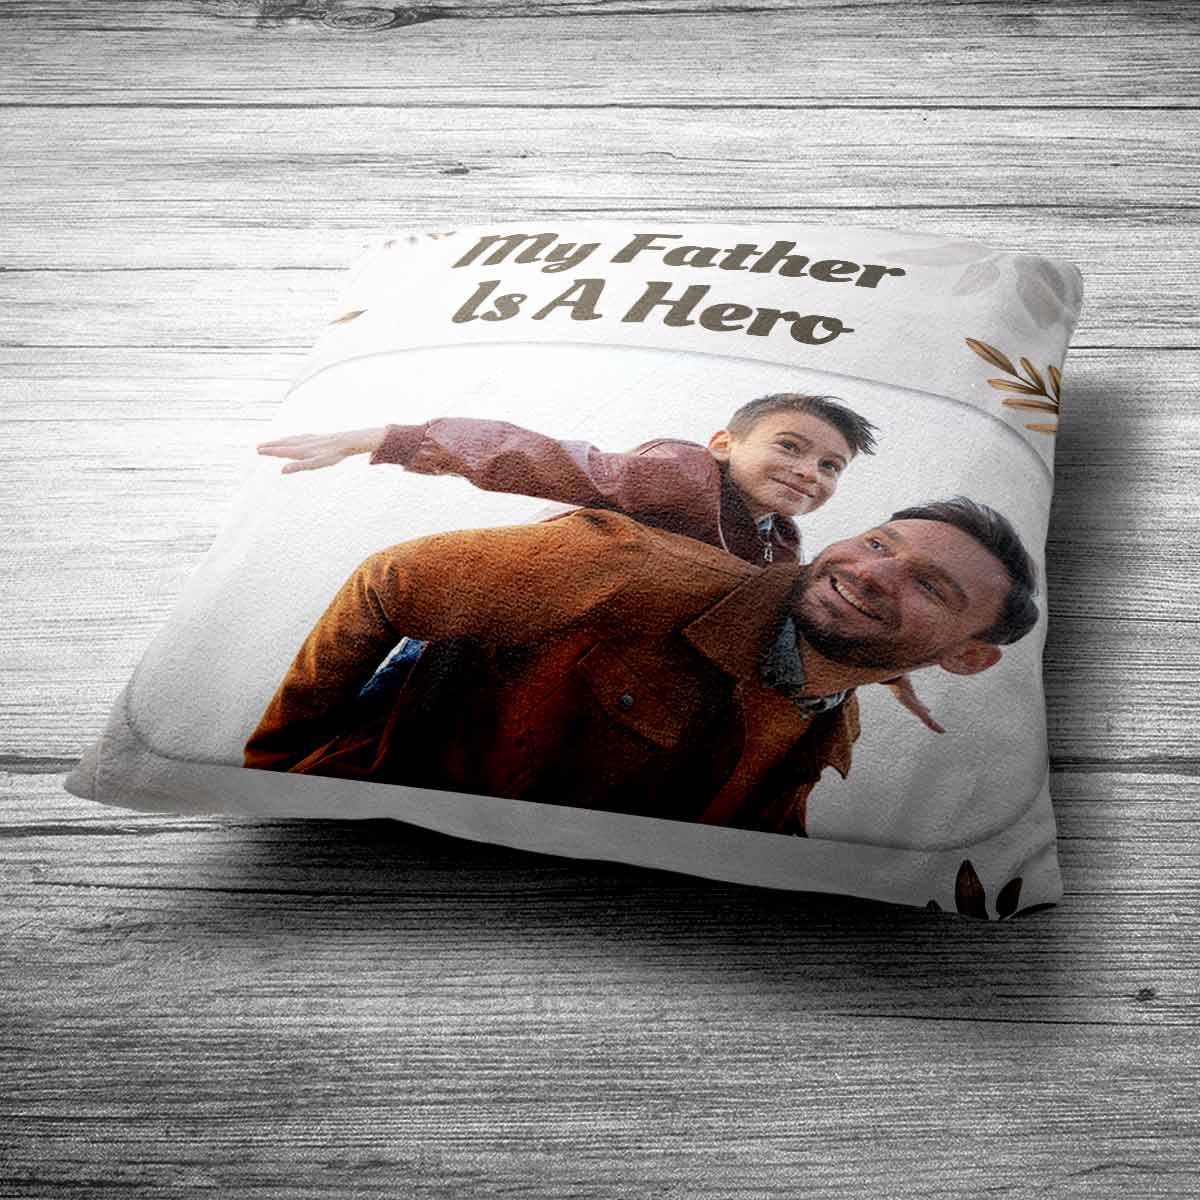 Personalised My Father is a Hero Cushion